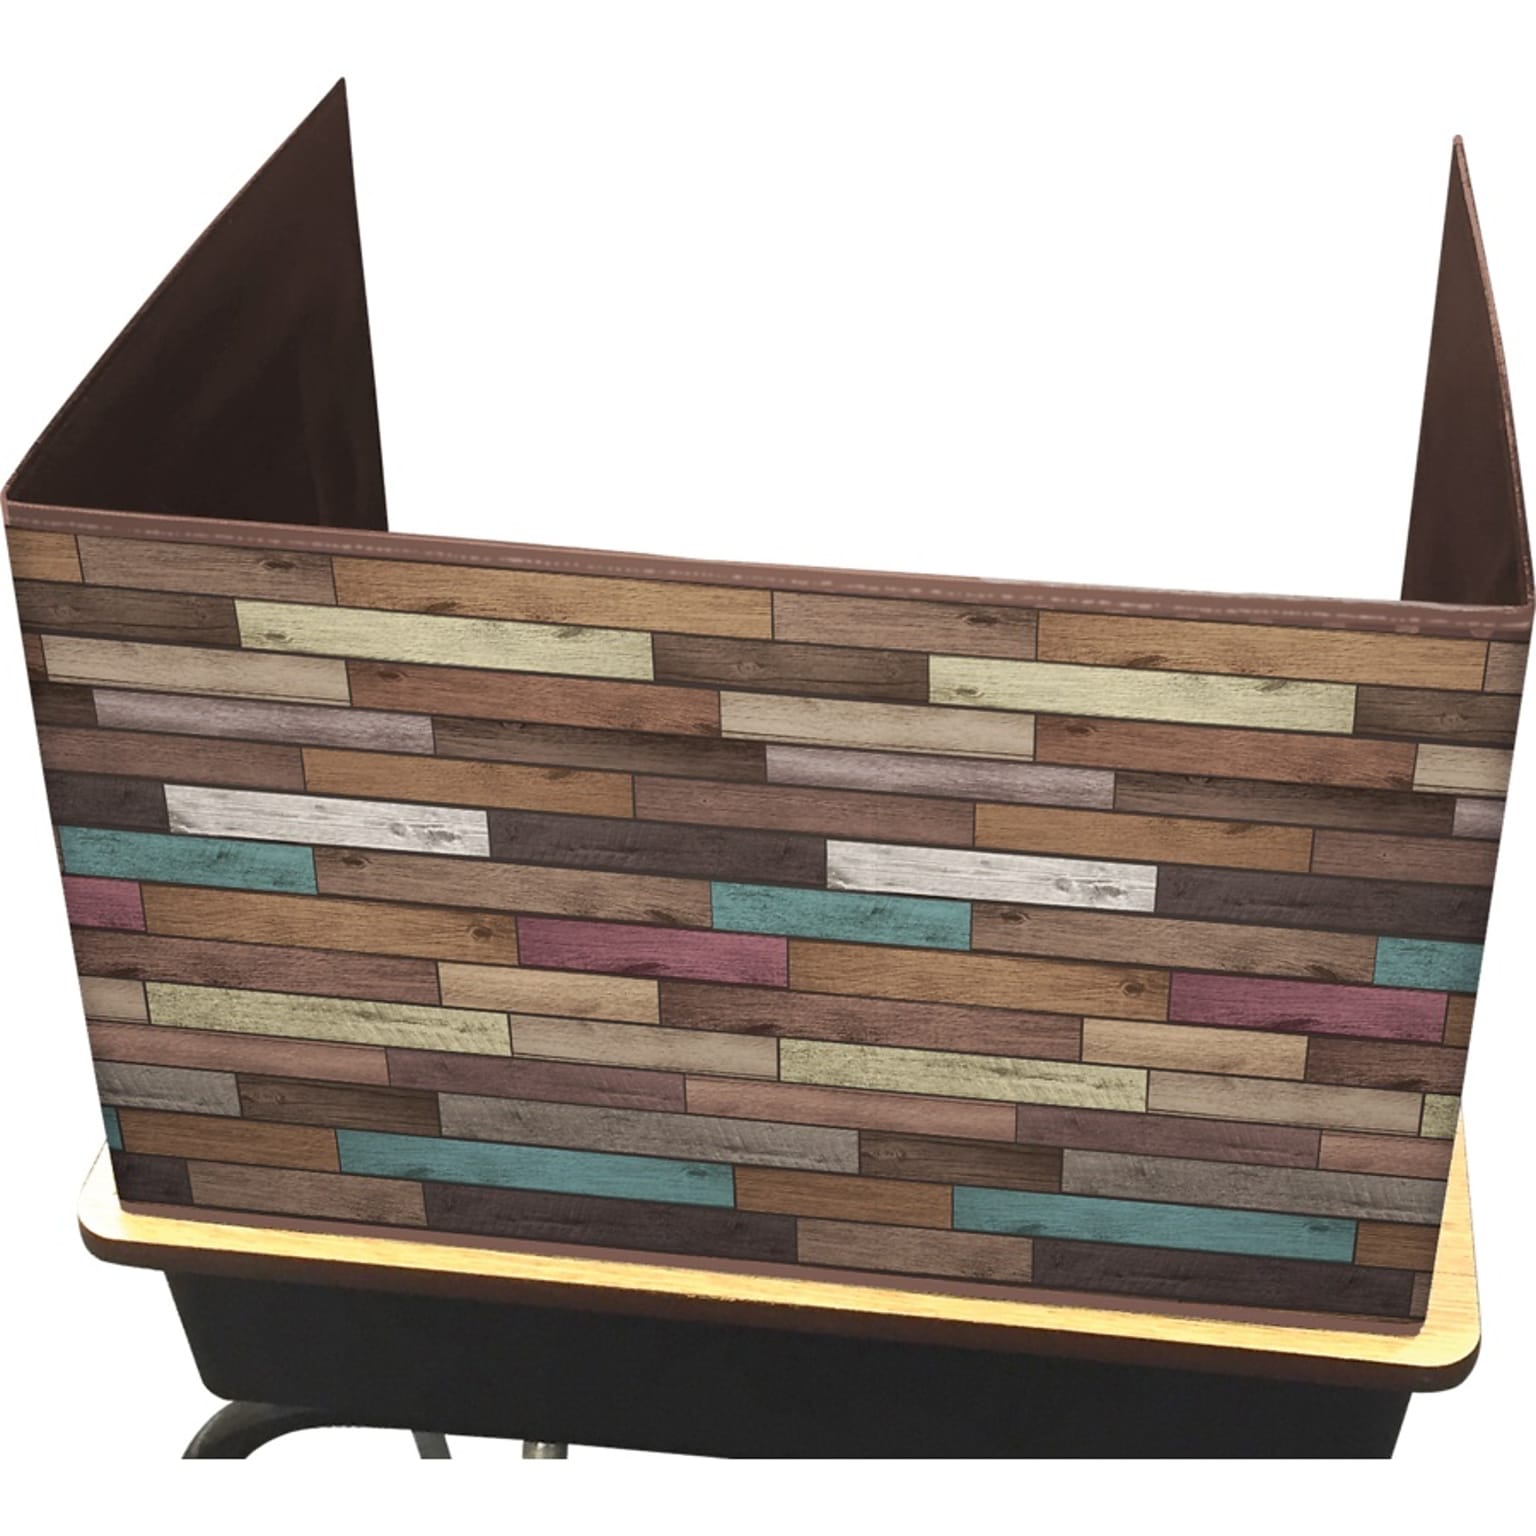 Teacher Created Resources 22 Reclaimed Wood Design Privacy Screen, Multicolored, Pack of 2 (TCR20346-2)